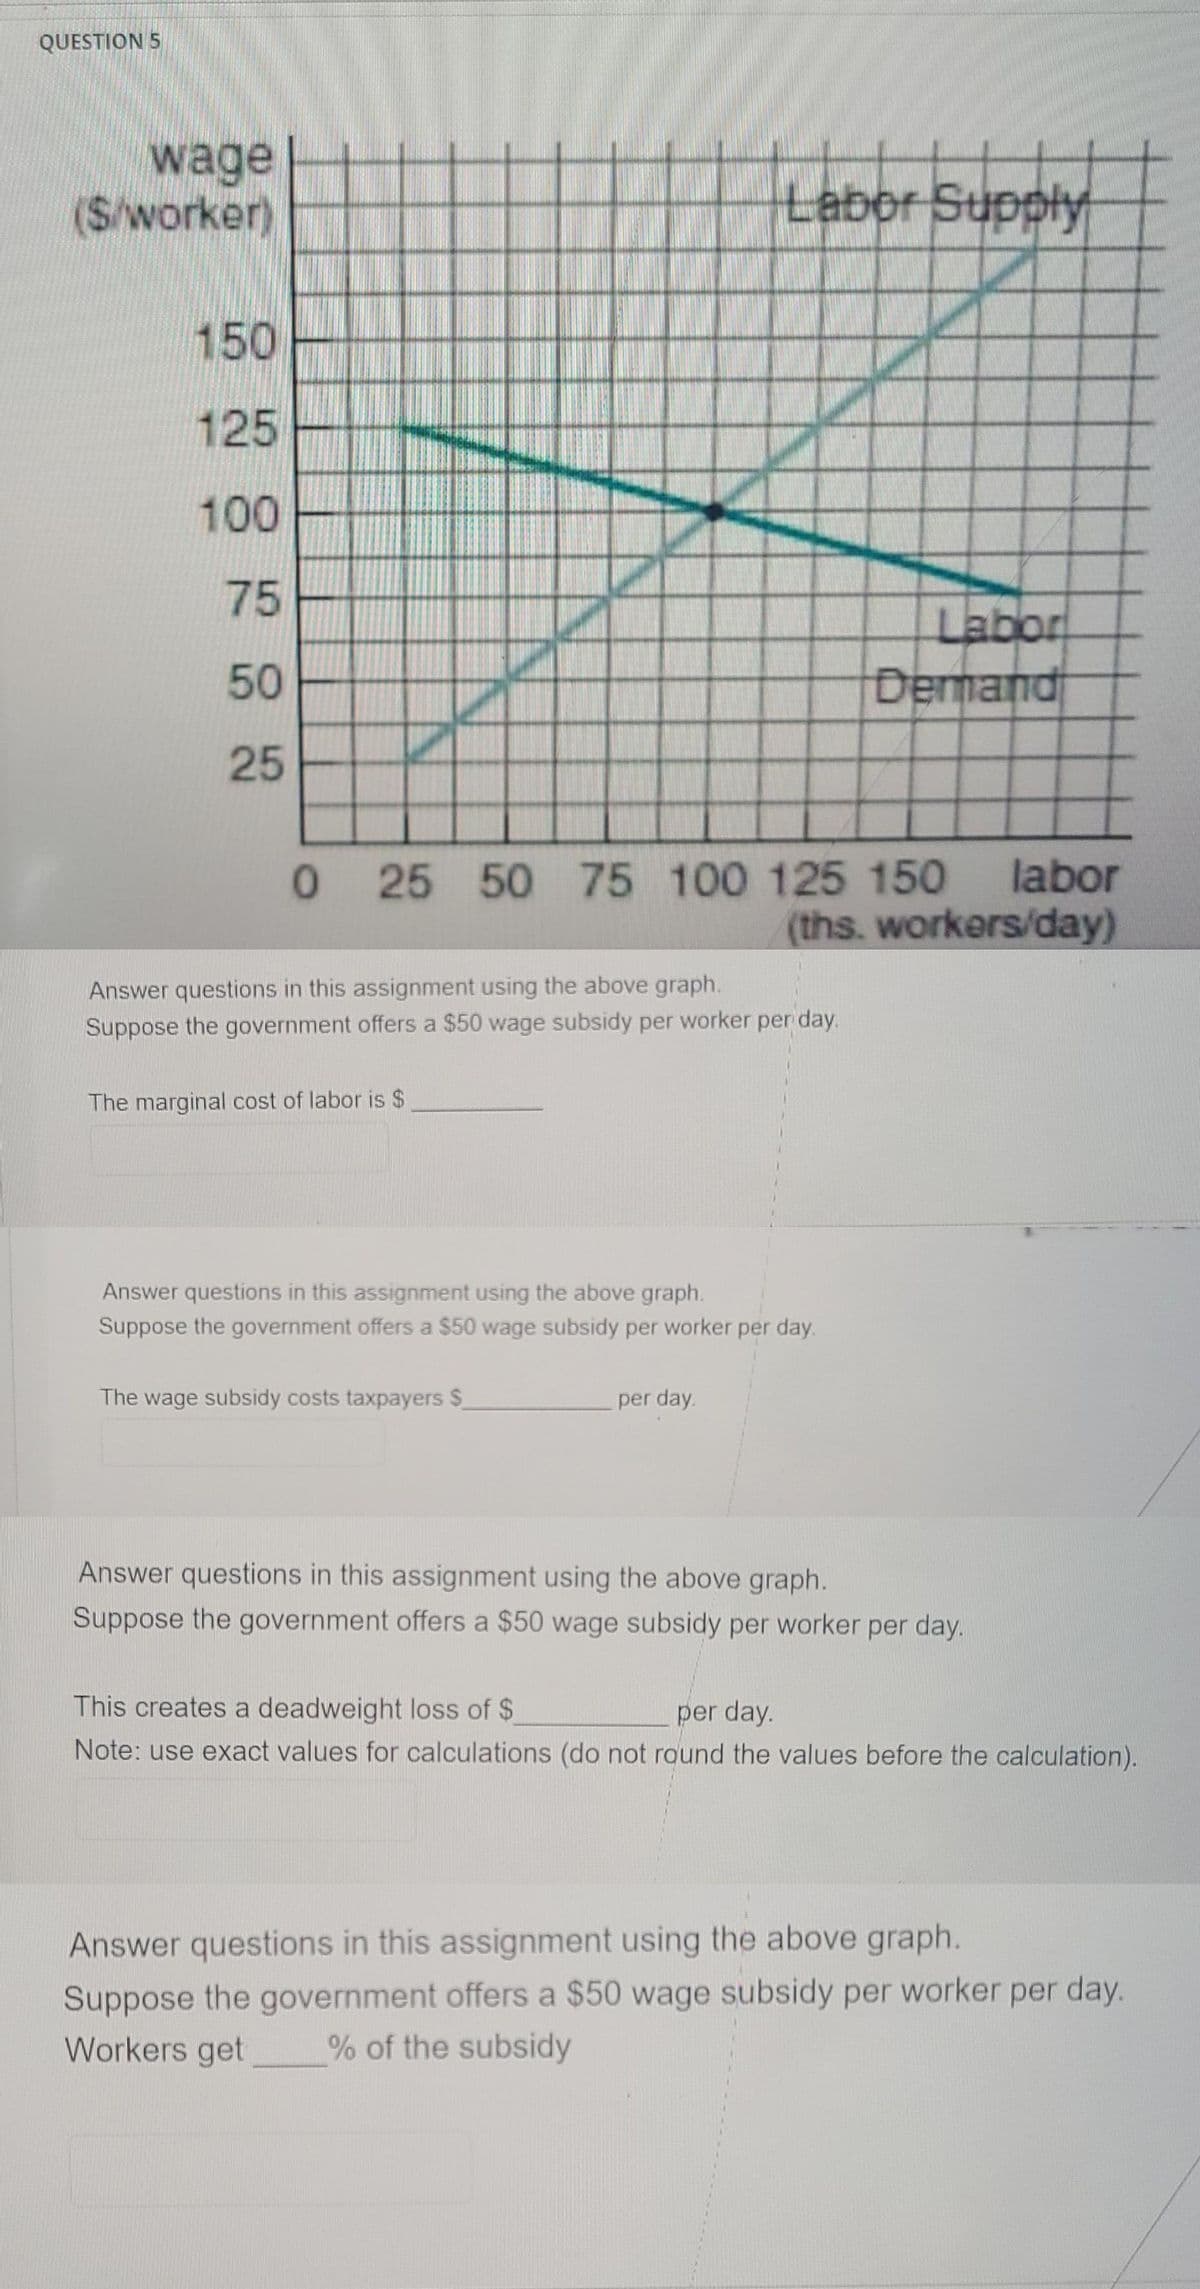 QUESTION 5
wage
(S/worker)
Labor Supply
150
125
100
75
Labor
Demand
50
25
0 25 50 75 100 125 150 labor
(ths. workers/day)
Answer questions in this assignment using the above graph.
Suppose the government offers a $50 wage subsidy per worker per day.
The marginal cost of labor is $
Answer questions in this assignment using the above graph.
Suppose the government offers a $50 wage subsidy per worker per day.
The wage subsidy costs taxpayers $
per day.
Answer questions in this assignment using the above graph.
Suppose the government offers a $50 wage subsidy per worker per day.
This creates a deadweight loss of $
per day.
Note: use exact values for calculations (do not round the values before the calculation).
Answer questions in this assignment using the above graph.
Suppose the government offers a $50 wage subsidy per worker per day.
Workers get
% of the subsidy
